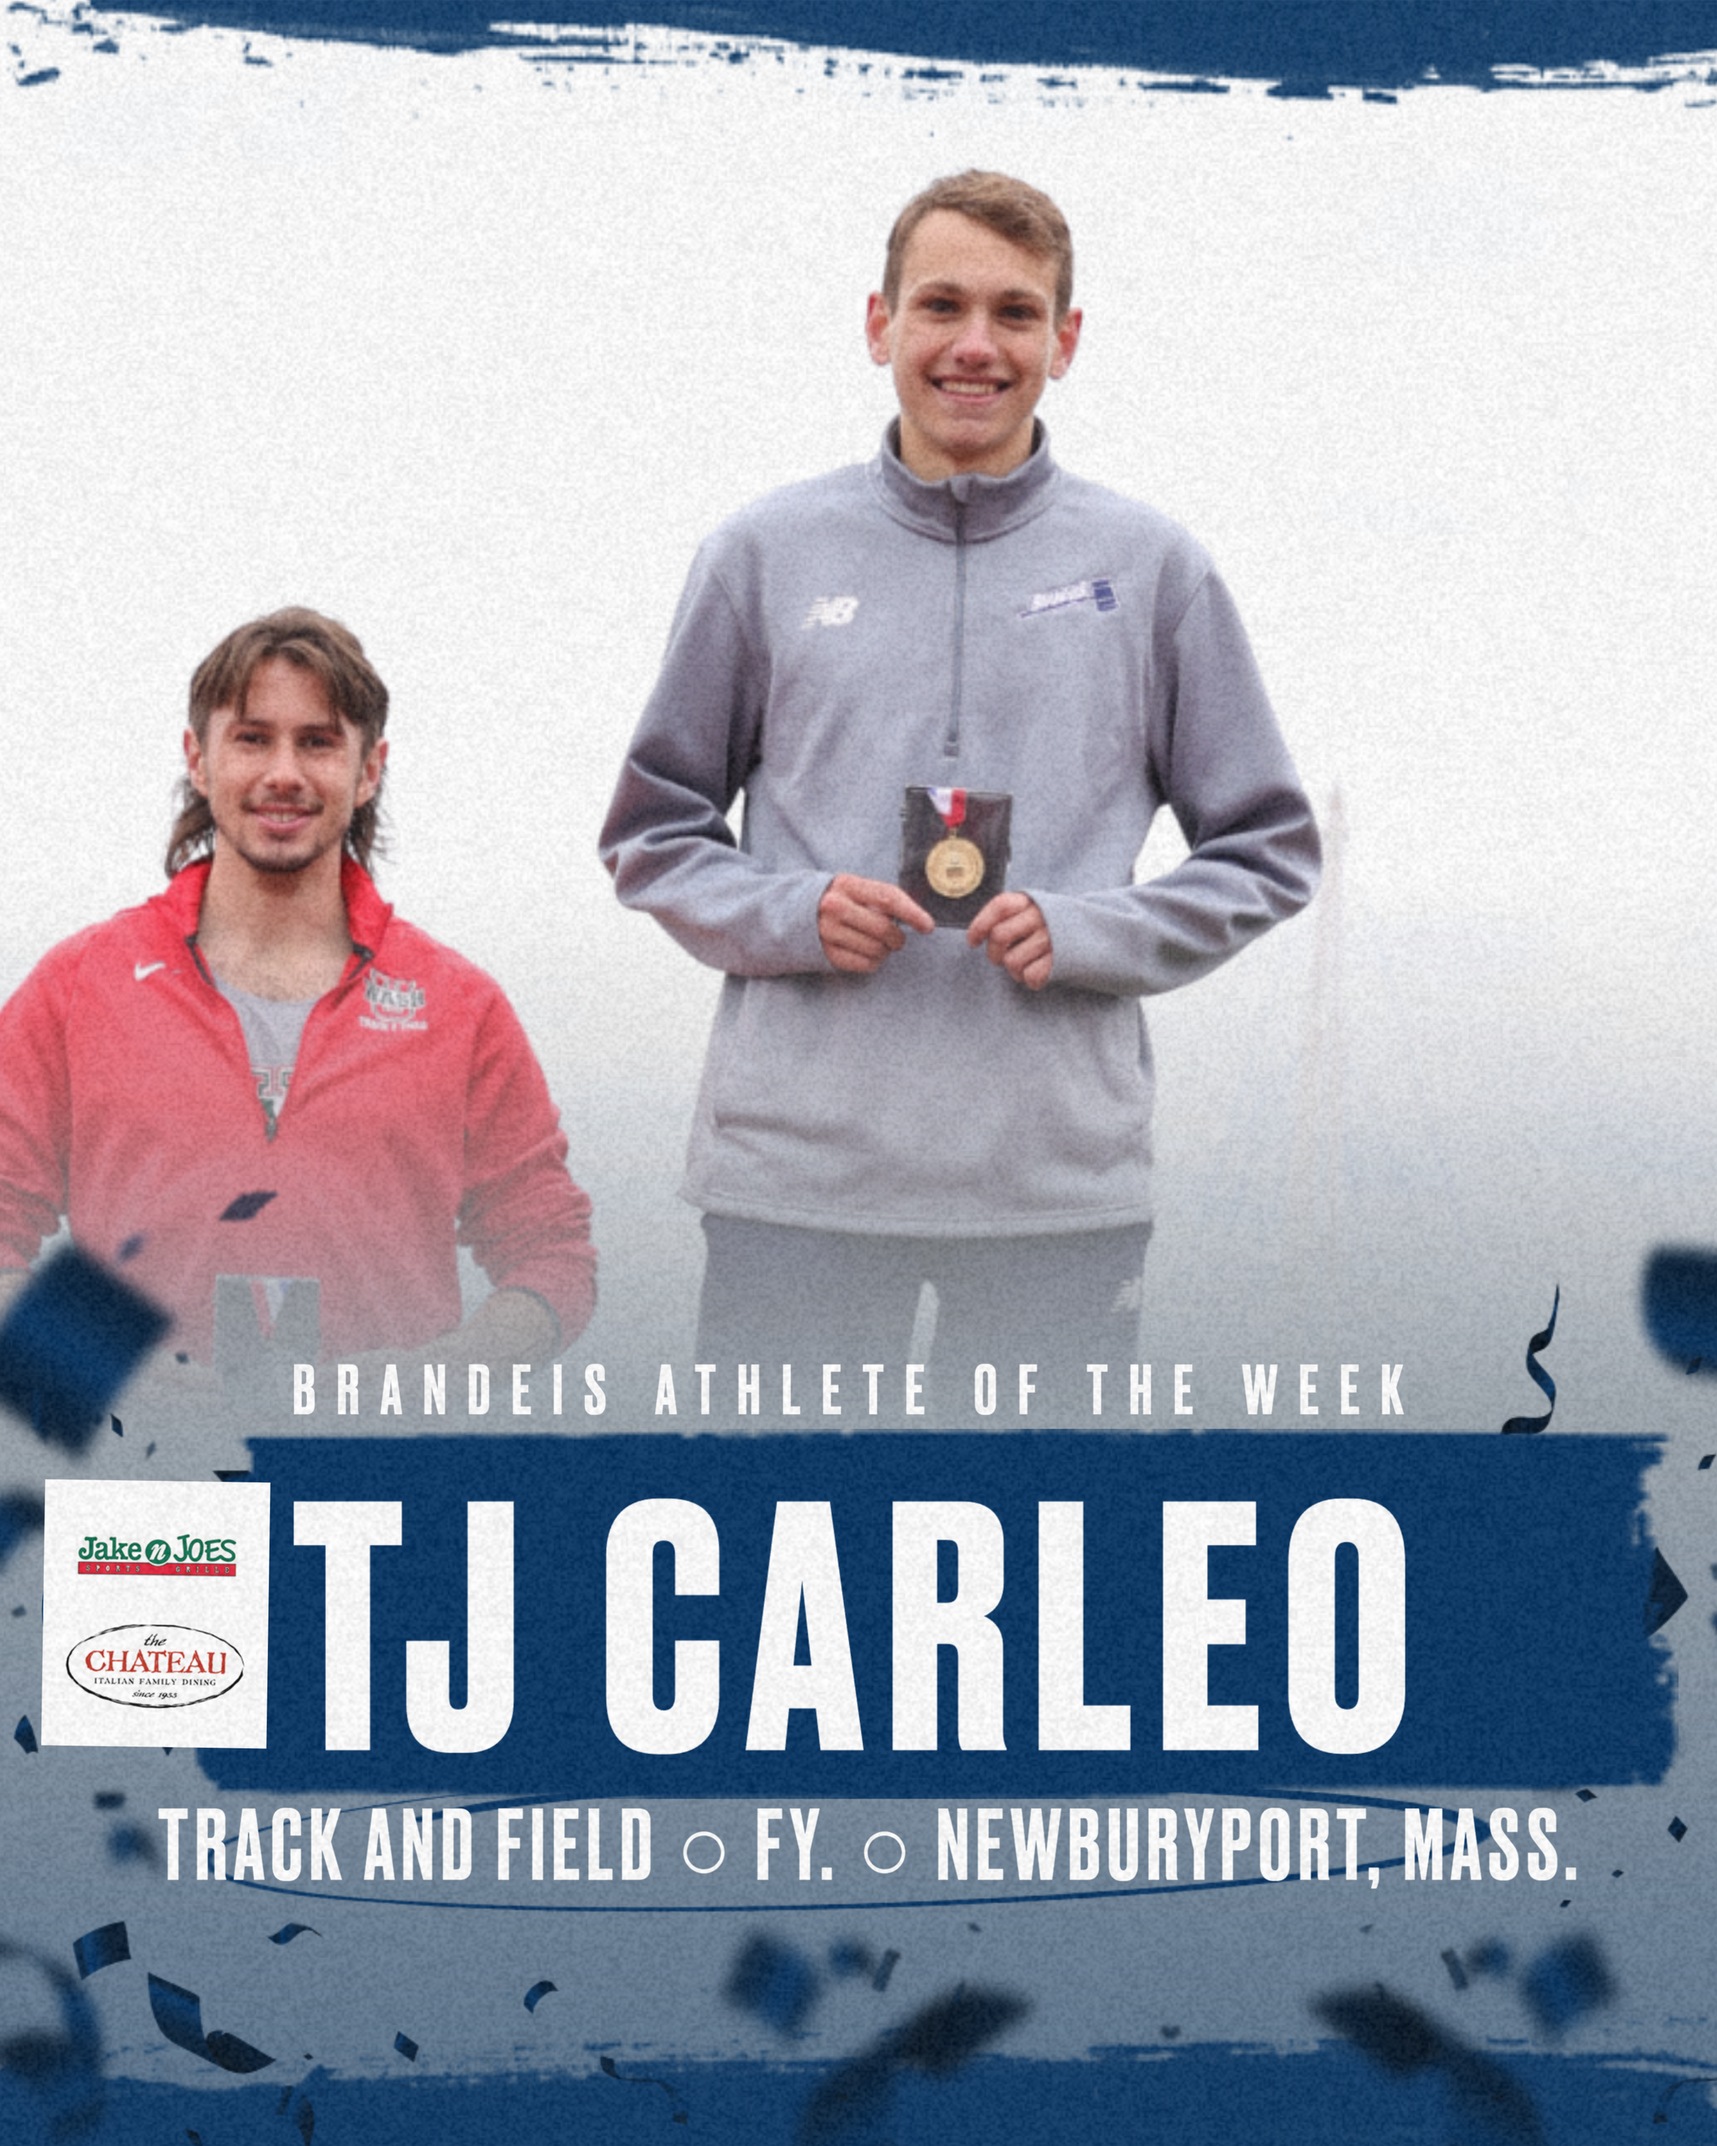 TEXT: Brandeis Athlete of the Week, Presented by Jake N Joes and The Chateau: TJ Carleo, Track and Field, First-Year, Newburyport, Mass.IMAGE: TJ Carleo receiving his gold medal for winning the 800-meter run